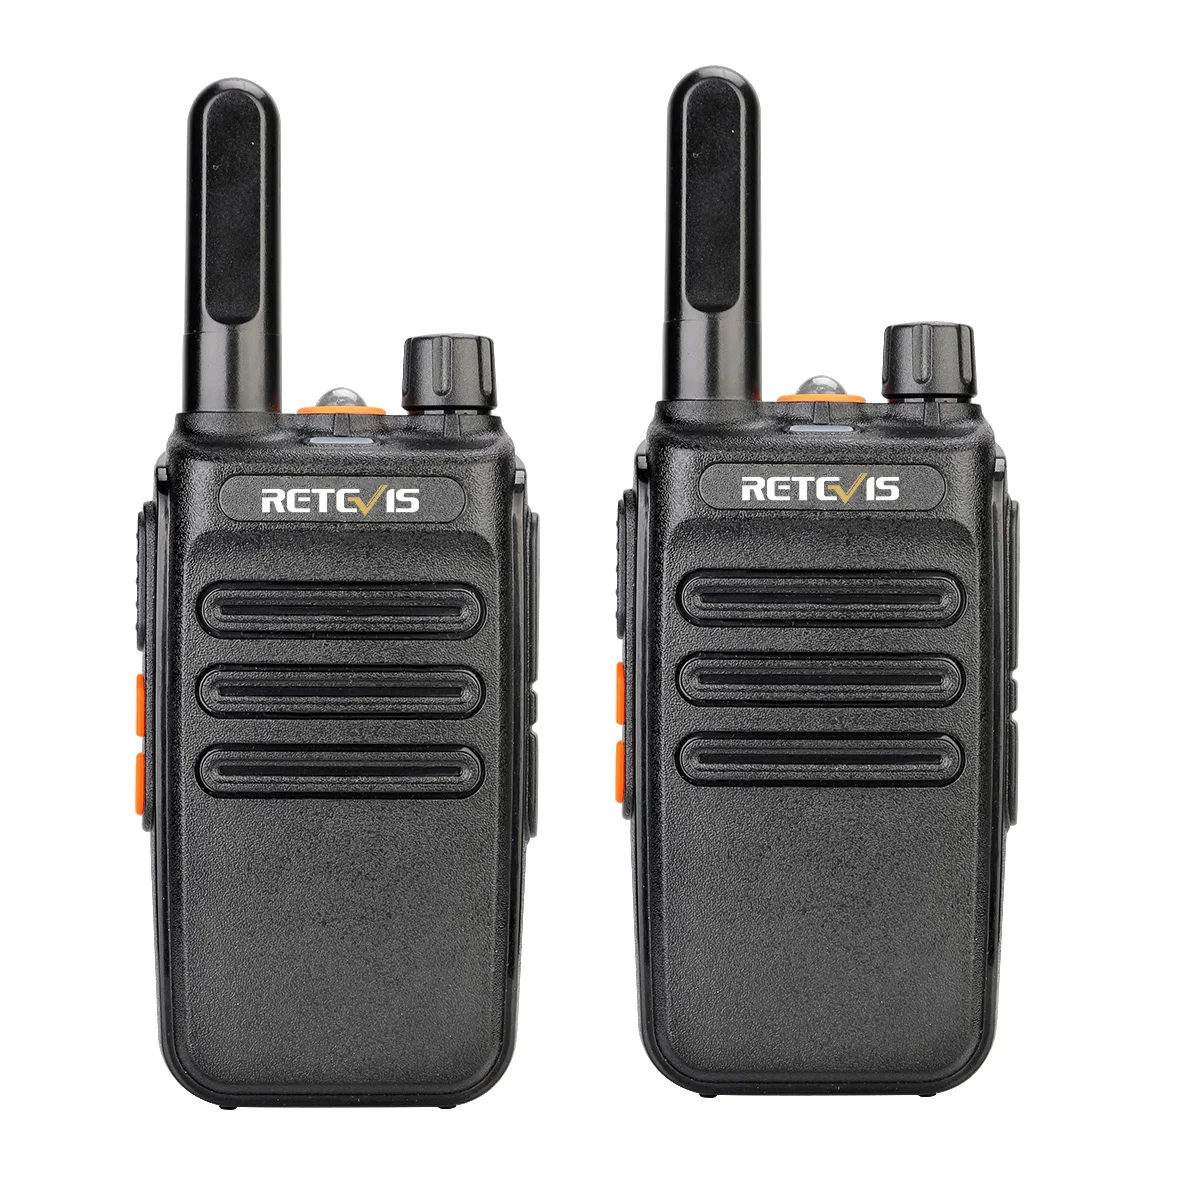 

Cheap FRS license free two way radio Retevis RB35 Channel lock walkie talkie 2W 16CH Large Flashlight TOT VOX Monitor